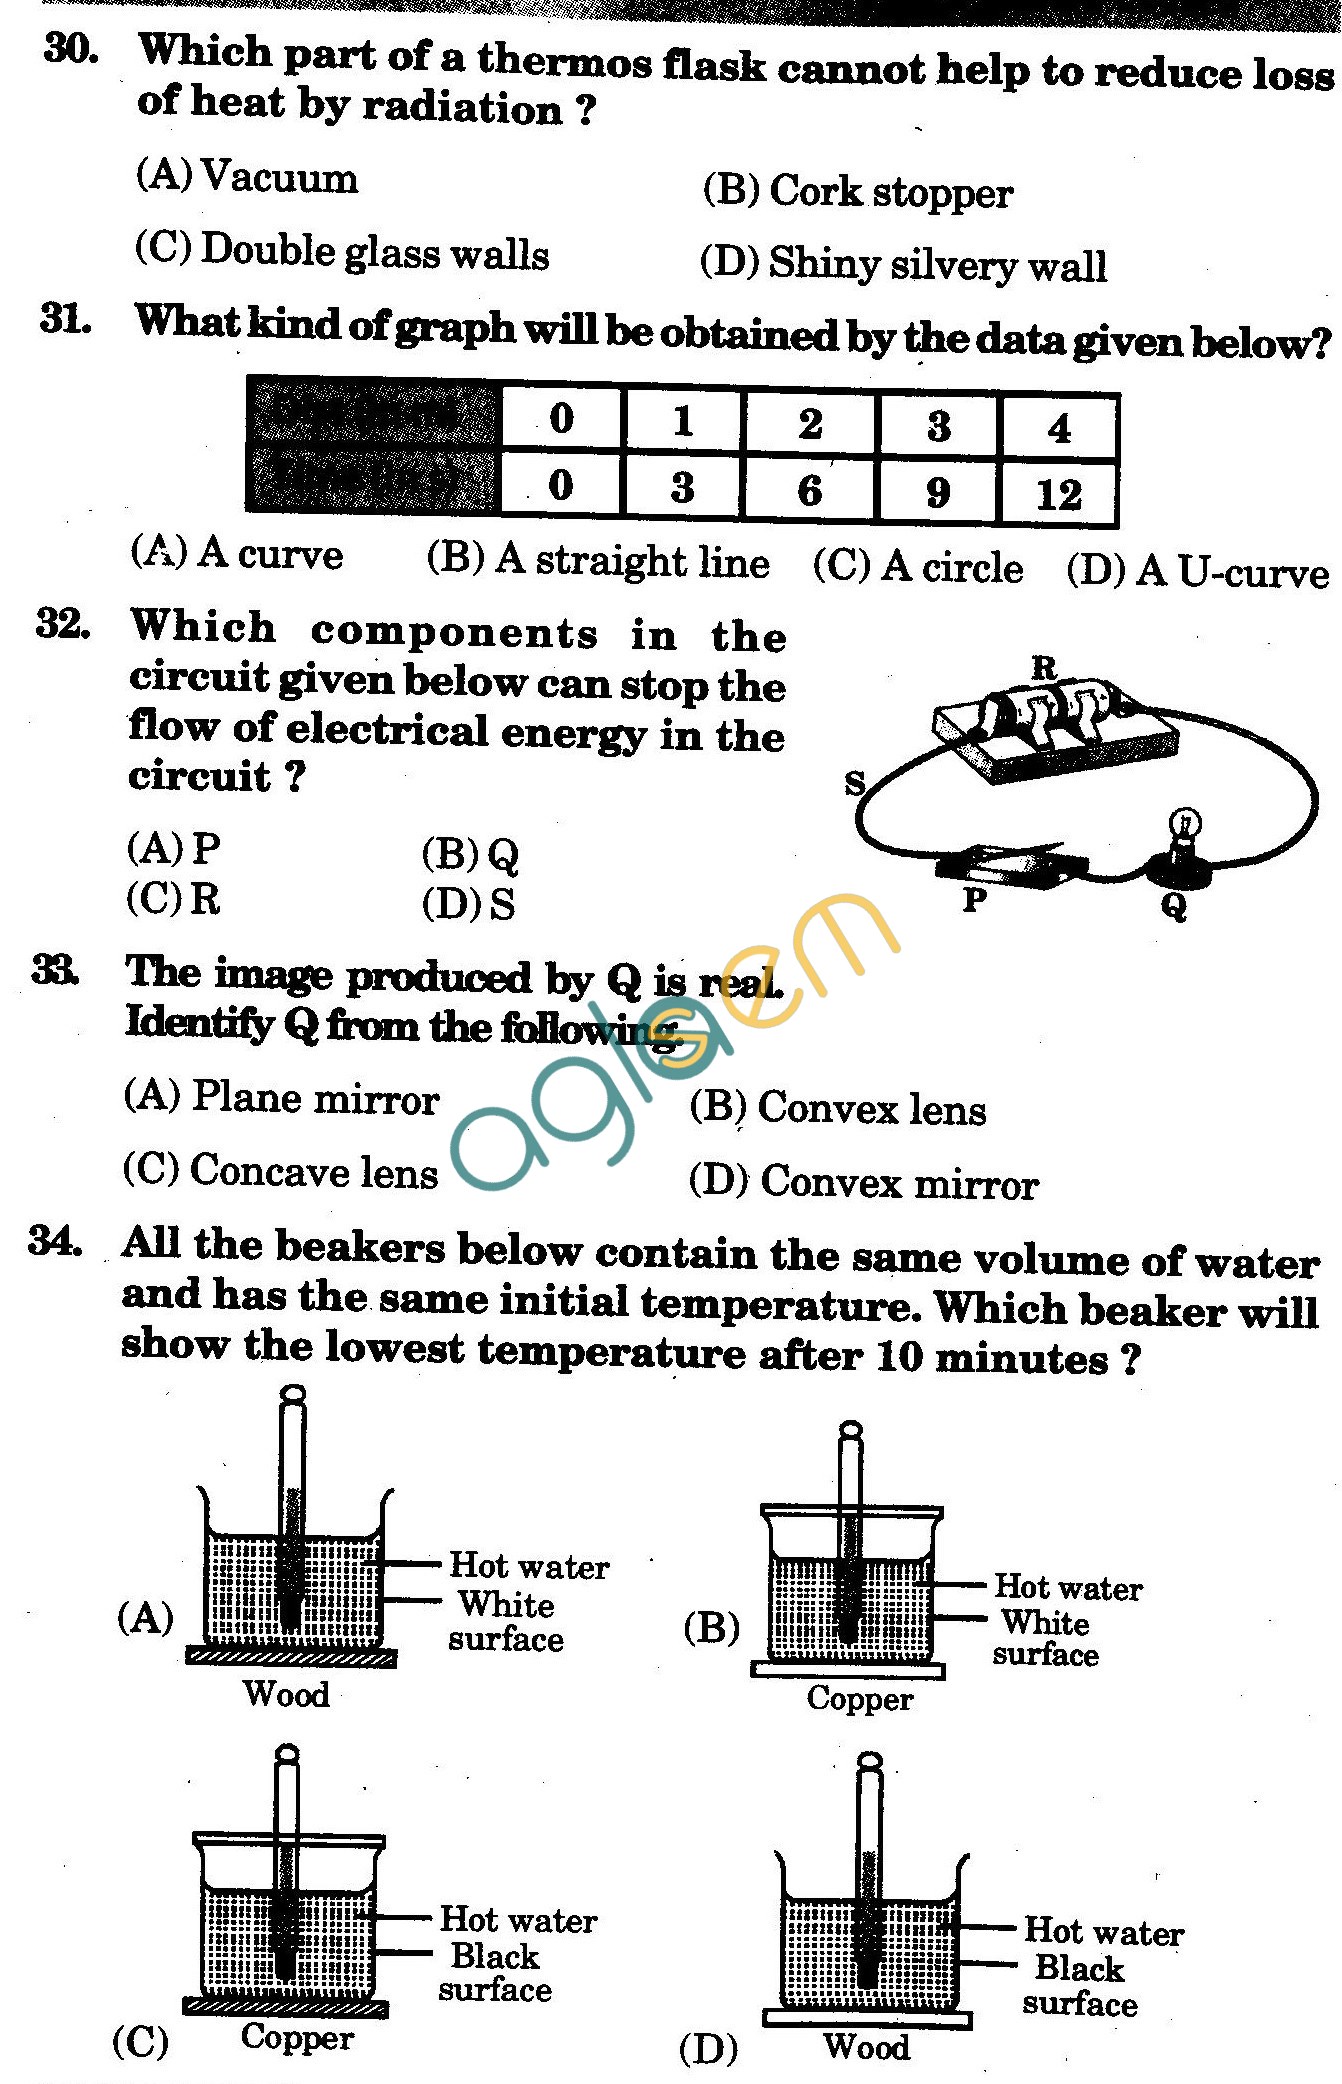 NSTSE 2010 Class VII Question Paper with Answers - Physics